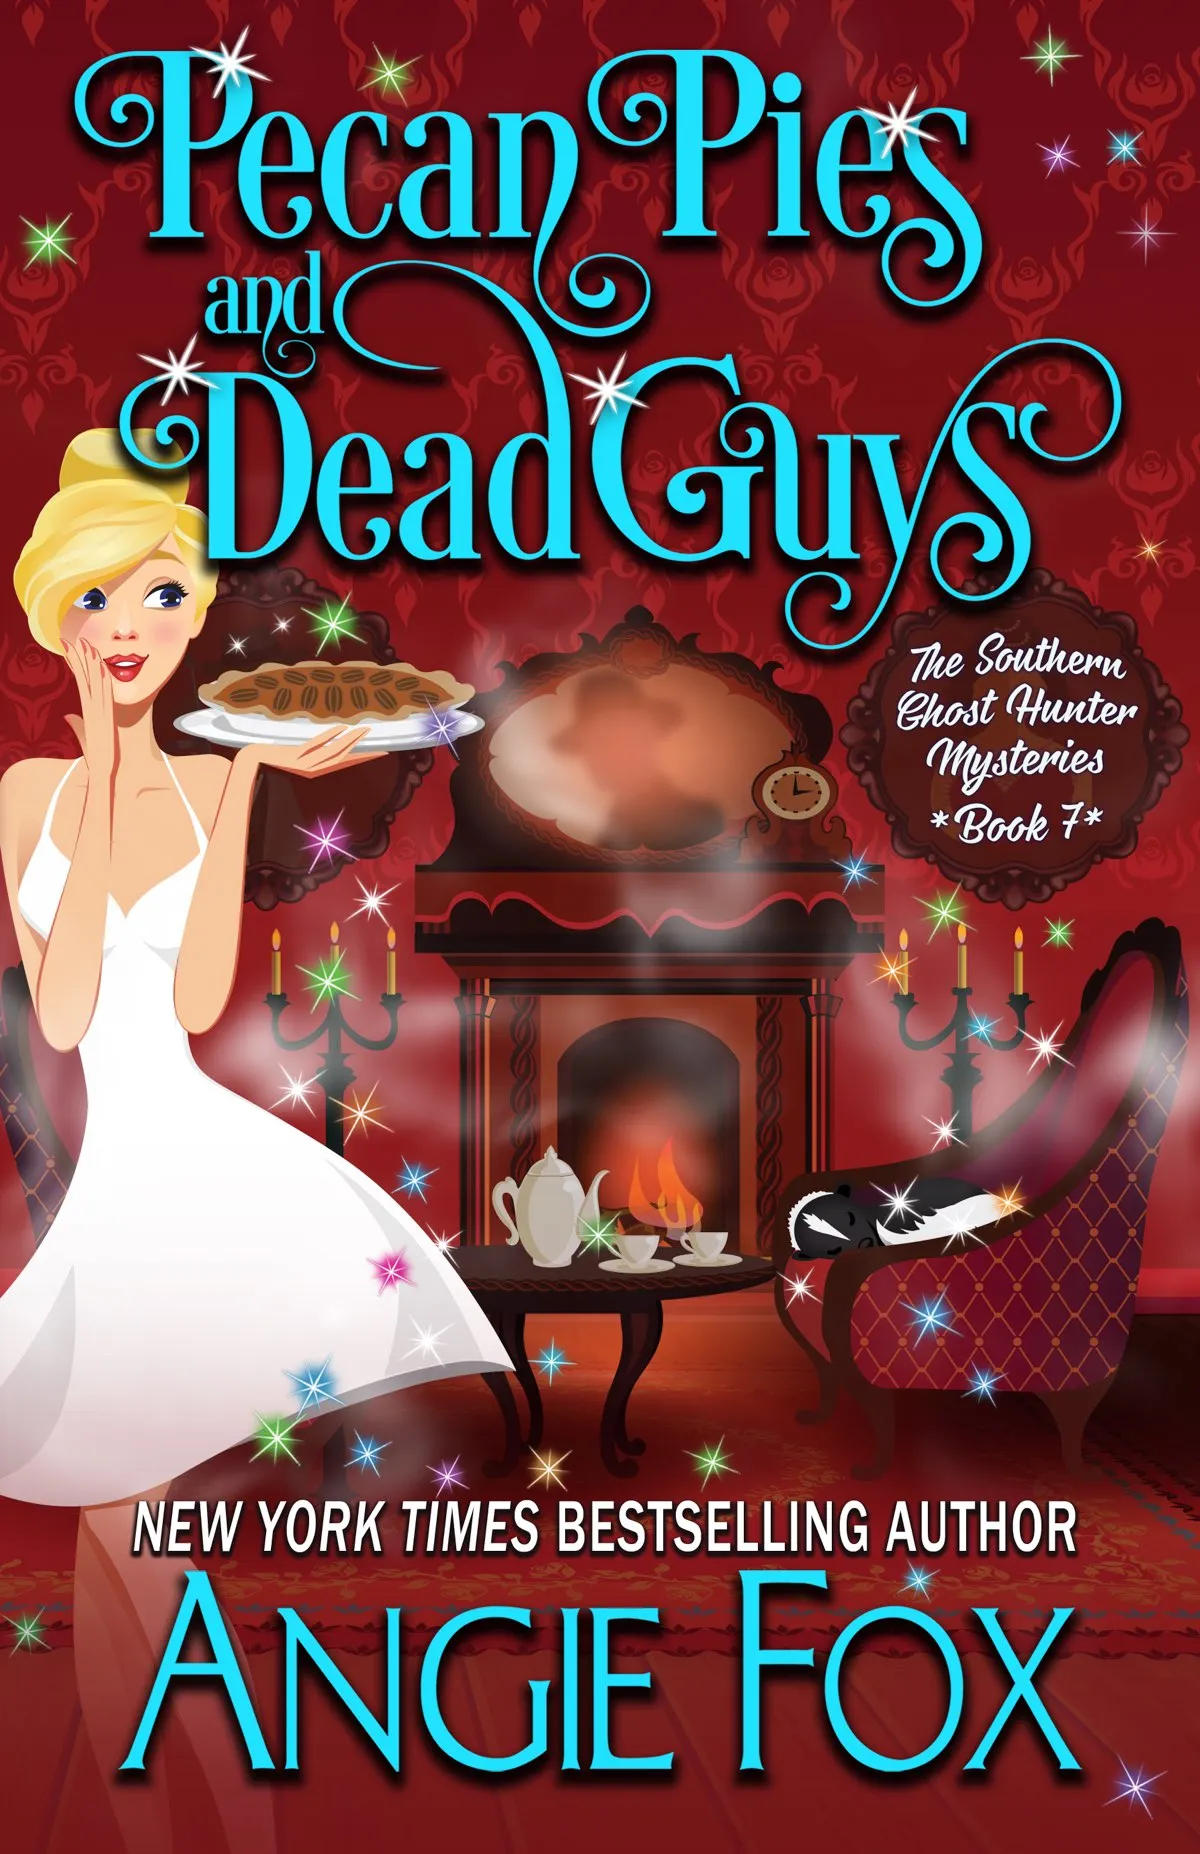 Pecan Pies and Dead Guys (Southern Ghost Hunter Mysteries #7)